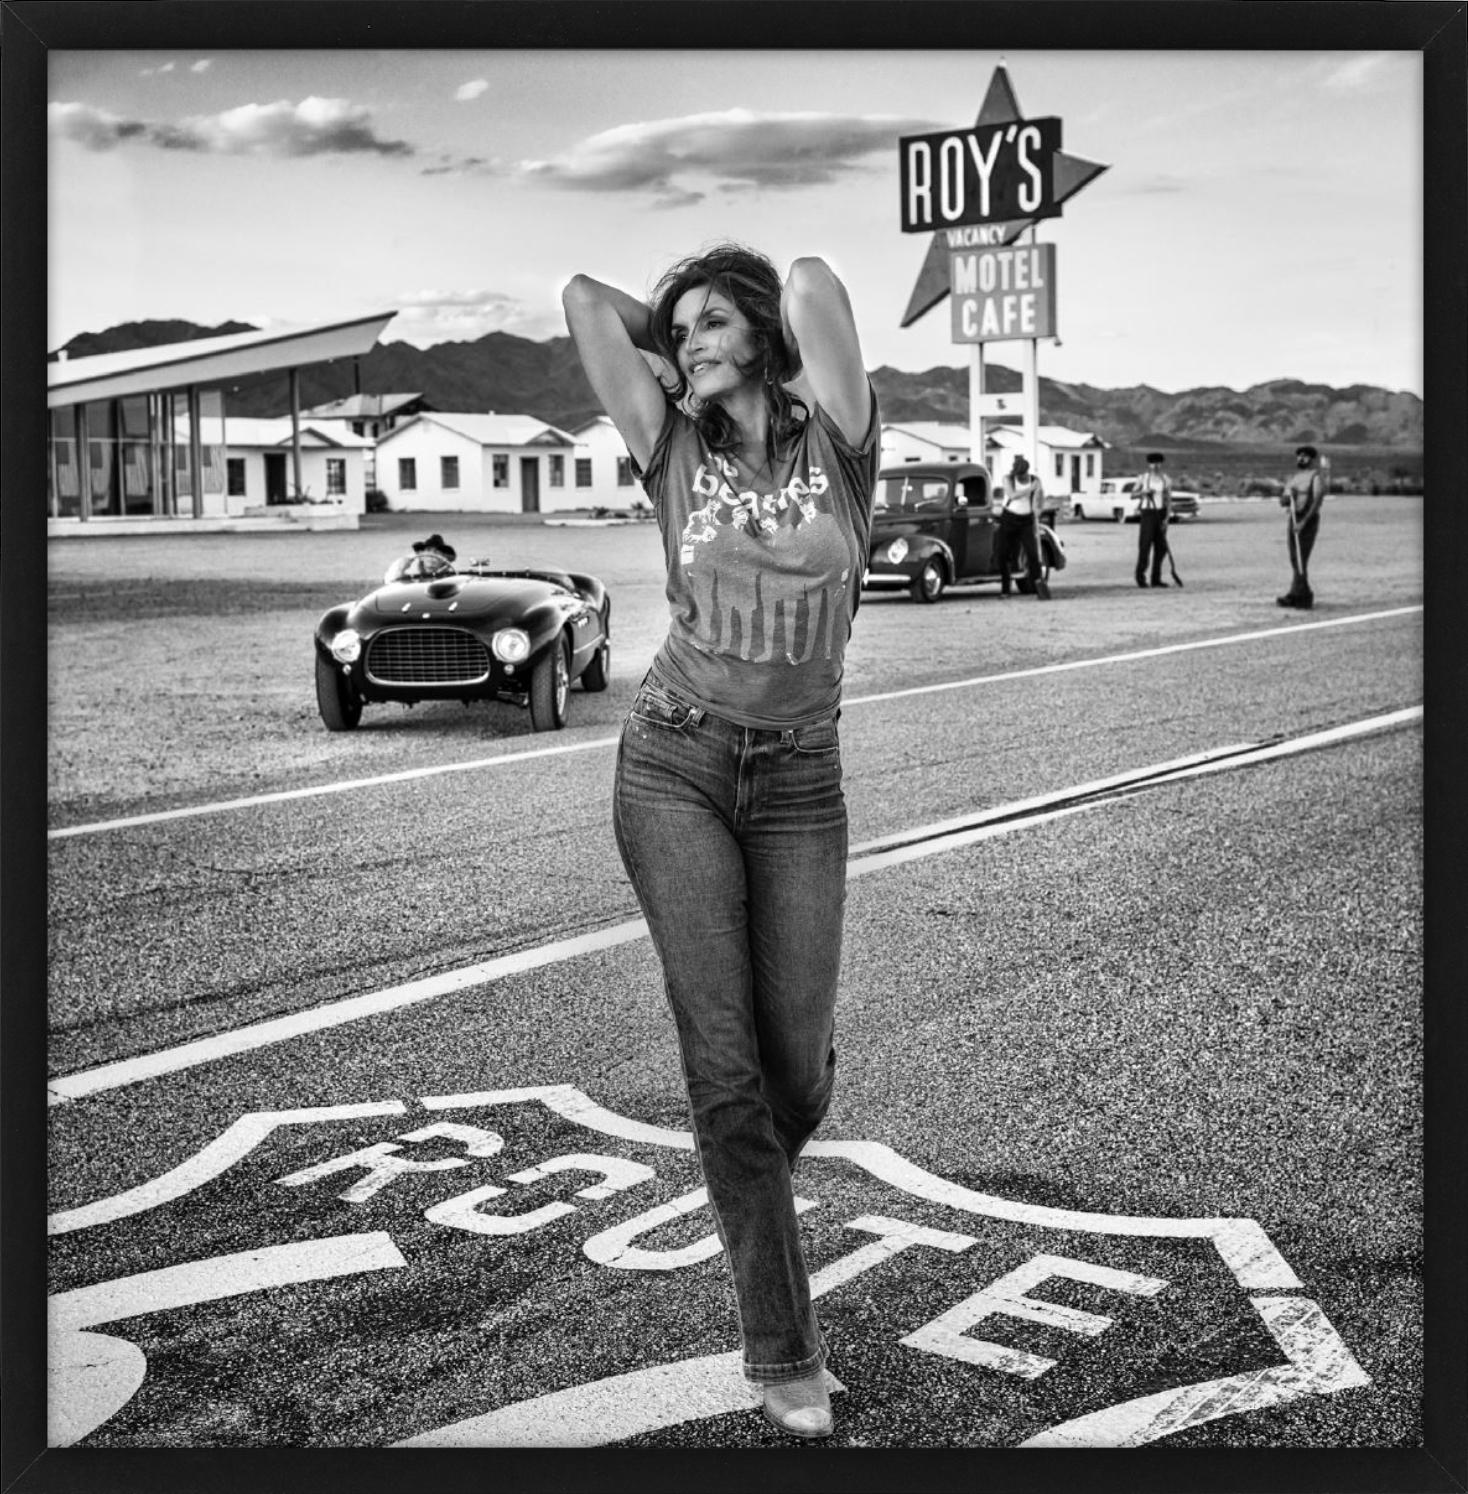 Roy's - Supermodel Cindy Crawford walking in front of 1950s motel on route 66 - Photograph by David Yarrow